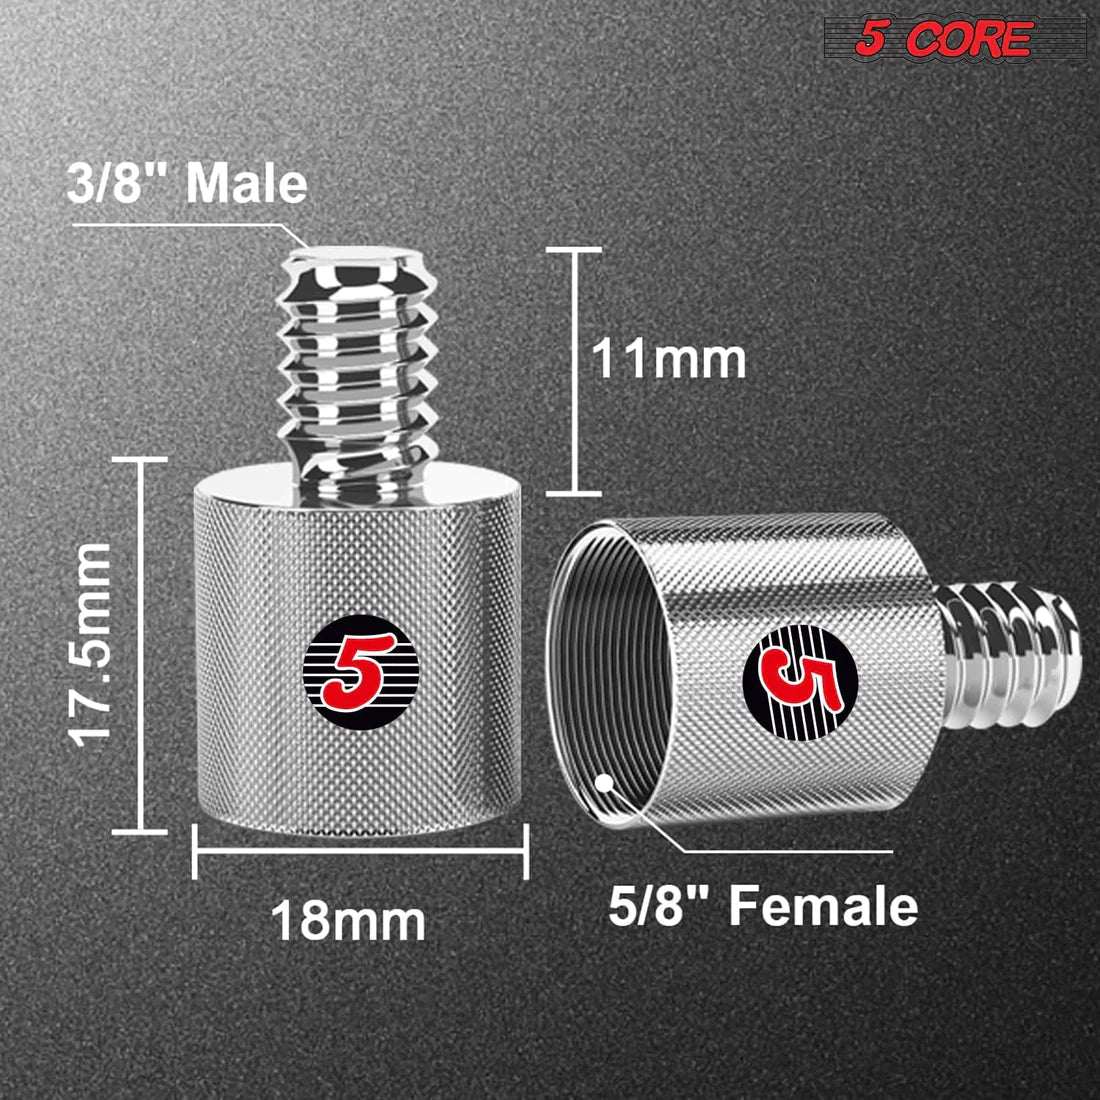 5 Core 12 Pcs Mic Stand Adapter • 5/8 Female to 1/4" Male Screw Adapter • w Knurled Surface Thread Adopter-3